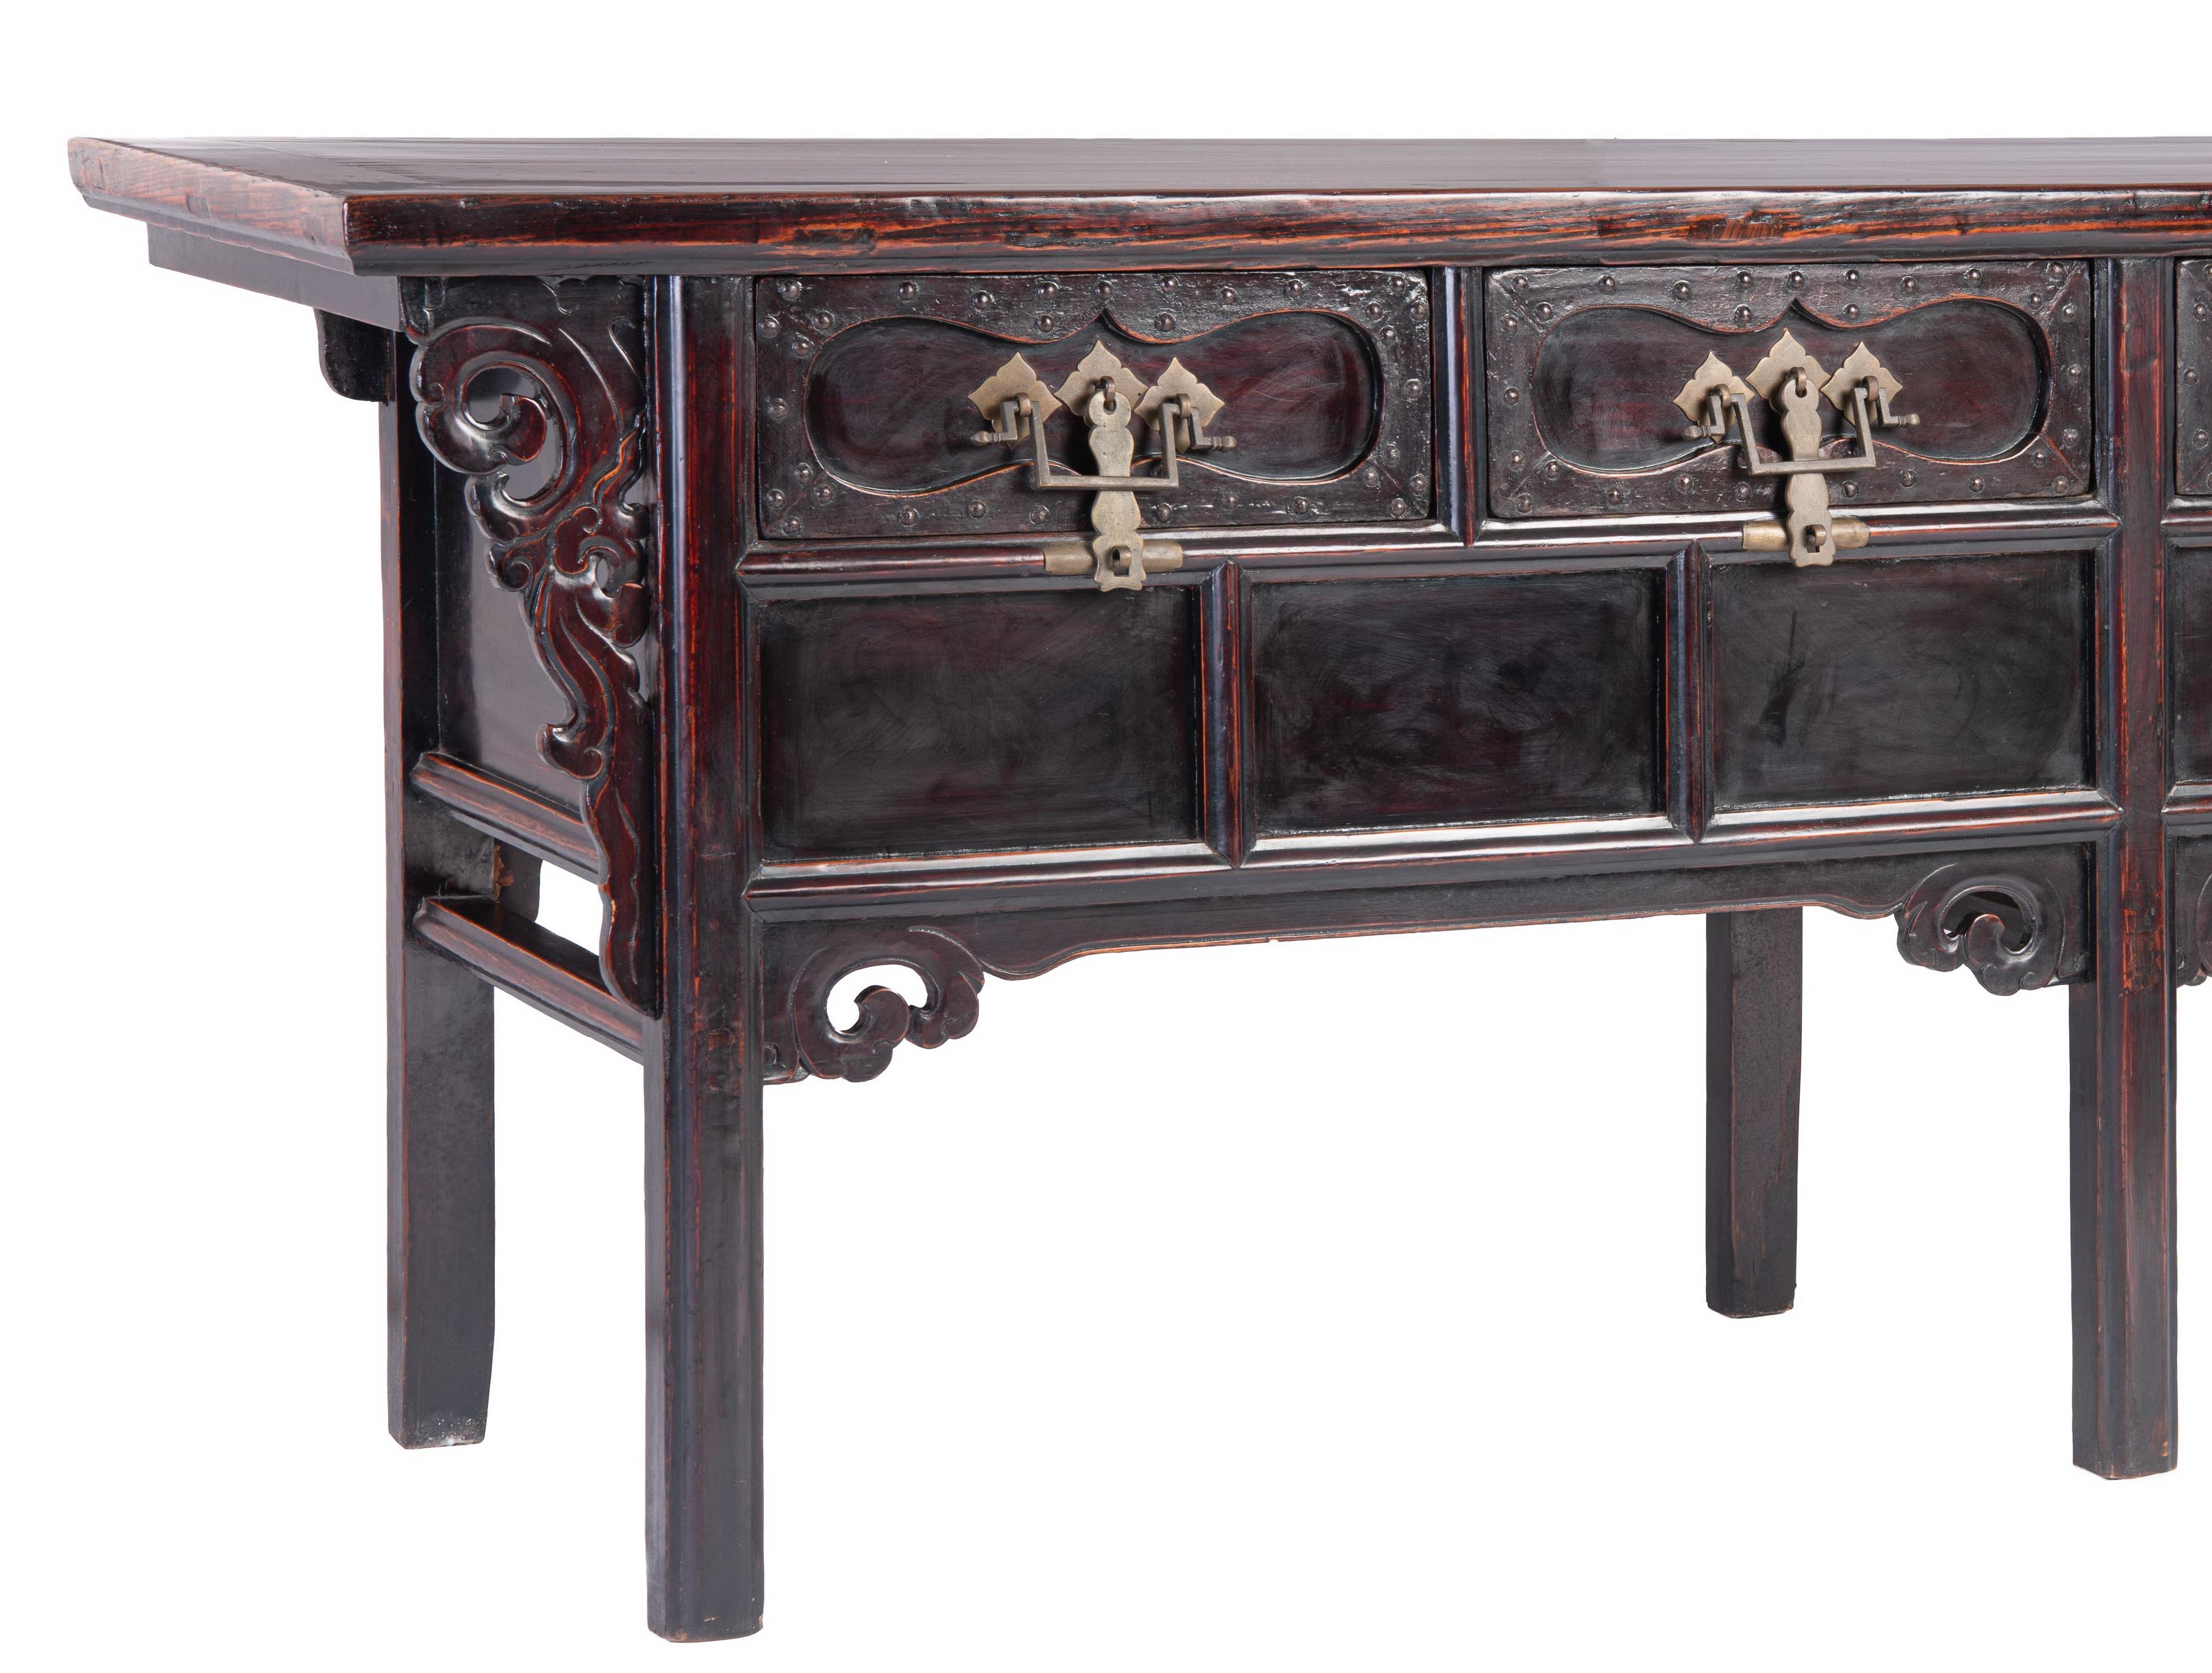 The superb raised coffer featuring a floating top panel inset within an ice-plate edged frame, protruding over open-carved scrolled foliage spandrels, a row of four drawers carved with shaped cartouches, decorated with brass studs and fitted with